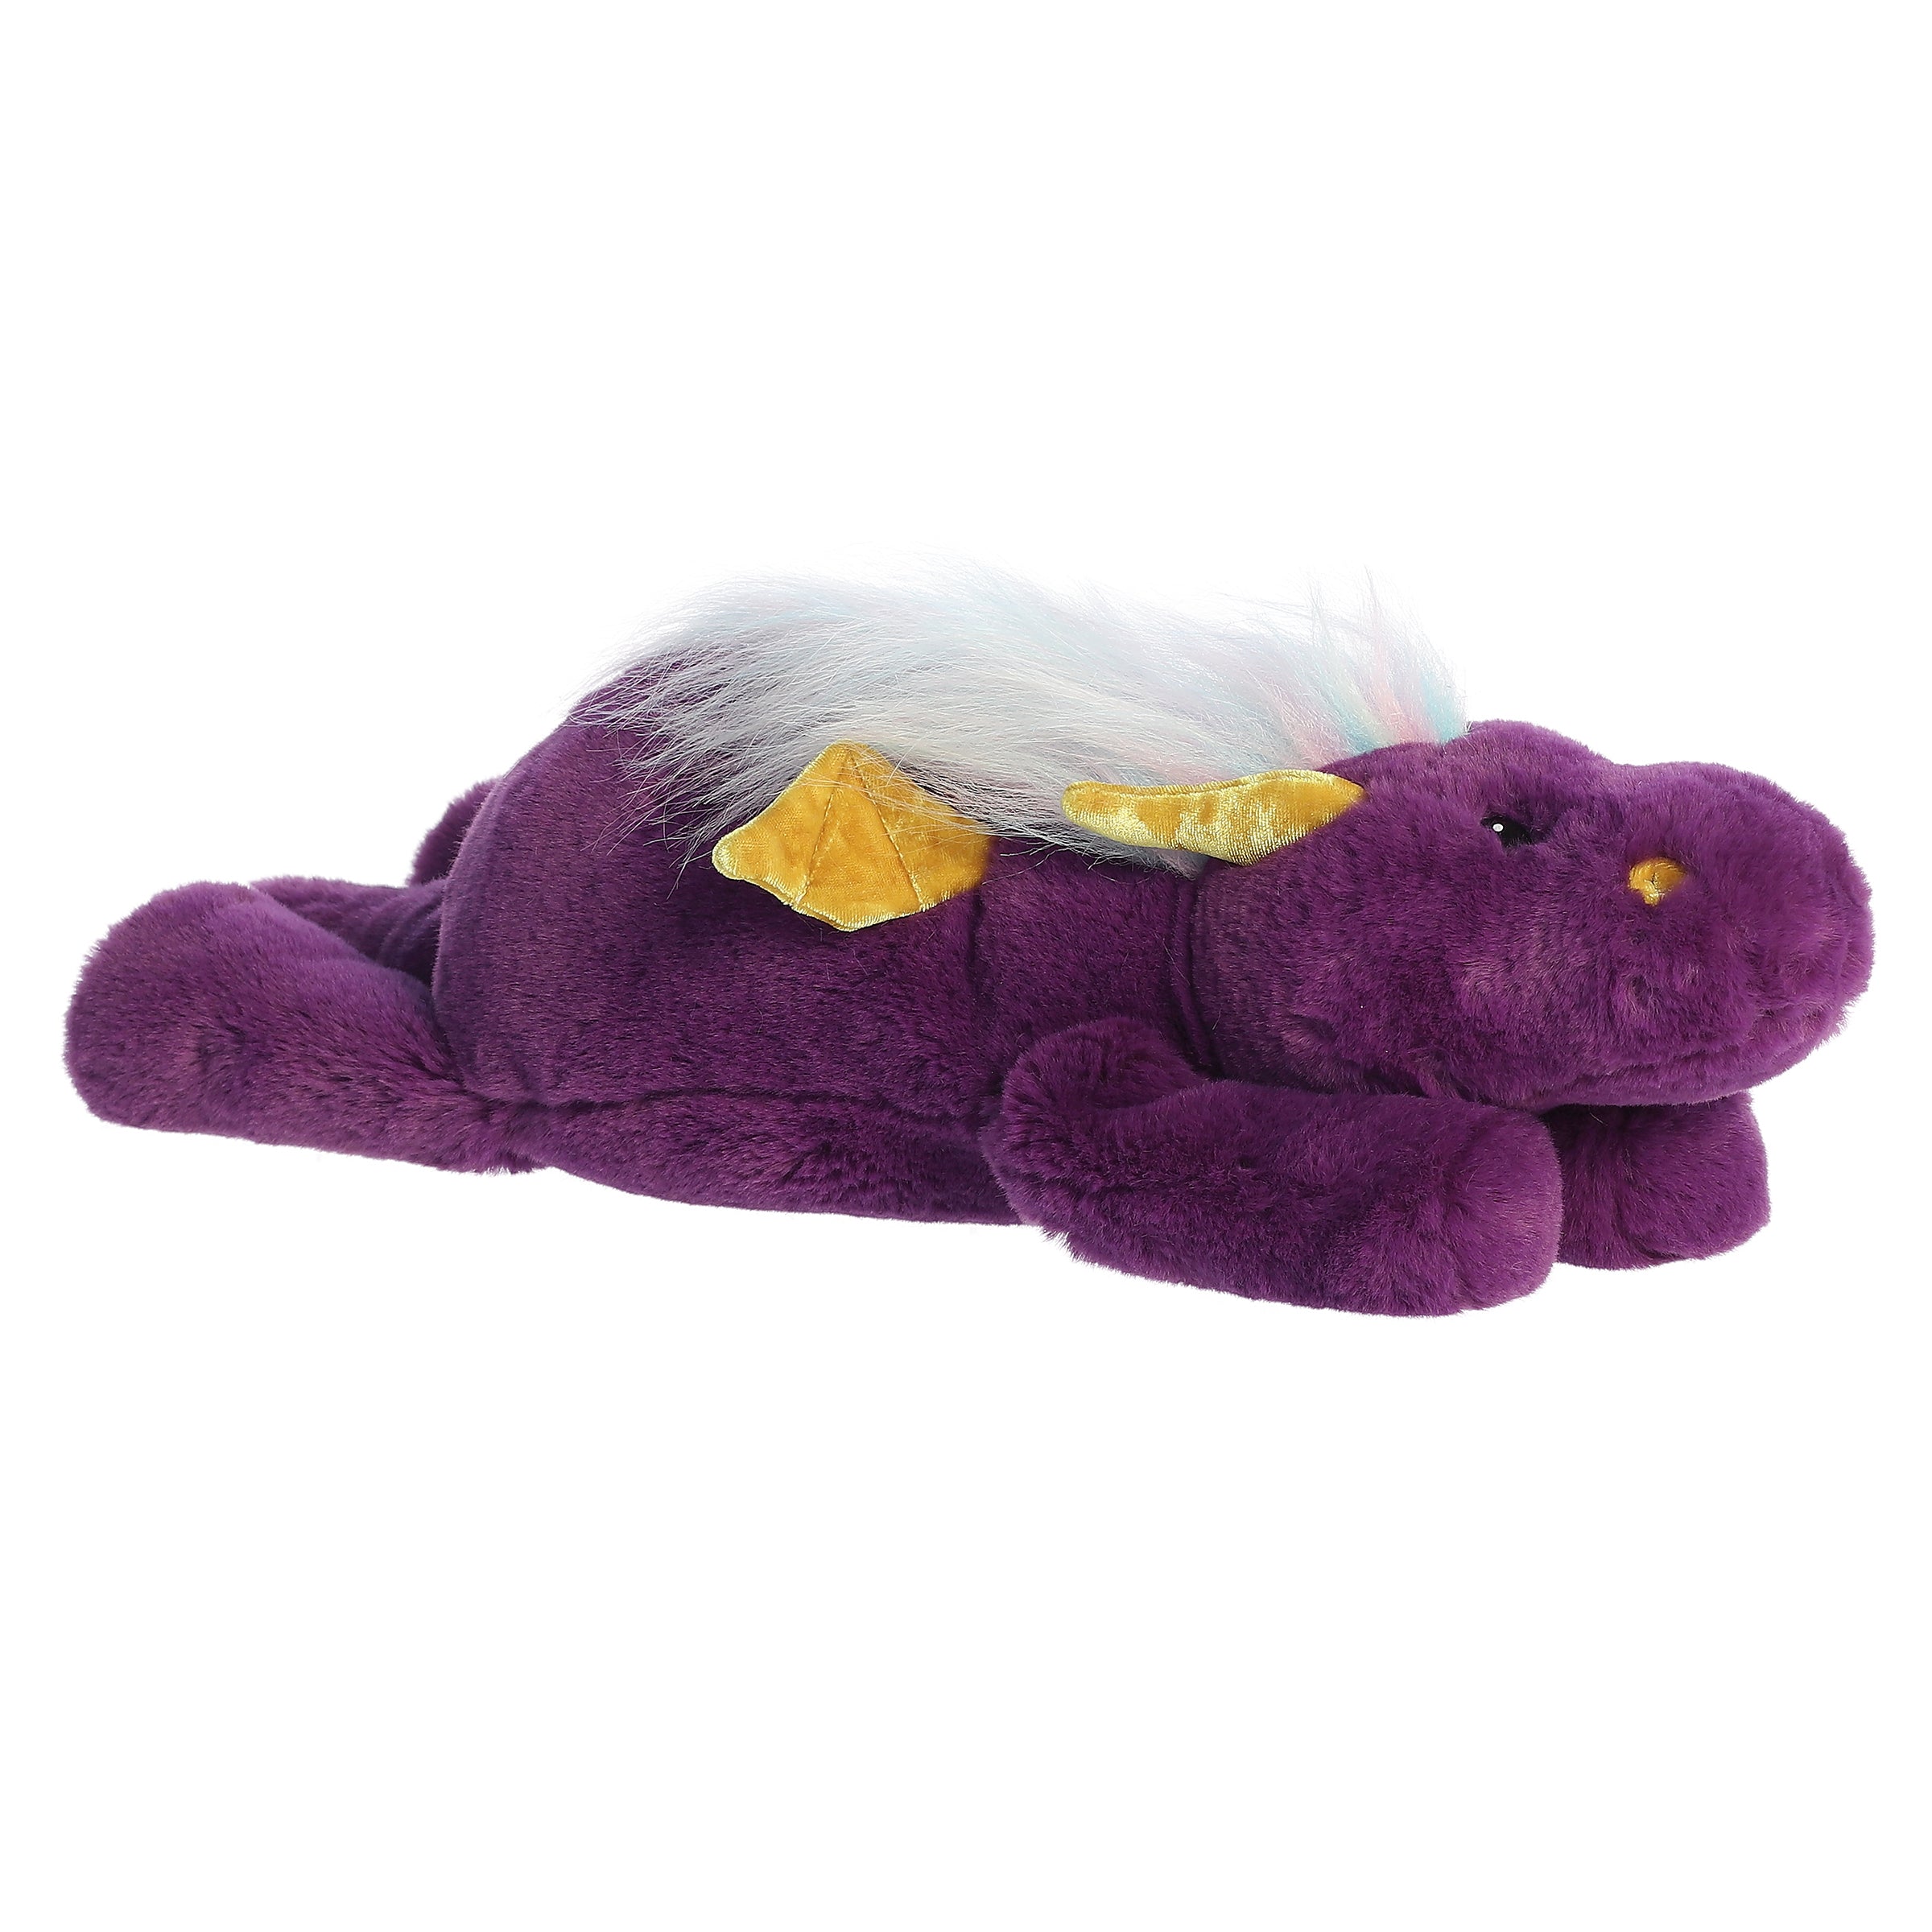 Purple Dragon plush resting flat, highlighting its deep purple body, cheerful yellow wings and horns, and long rainbow hair.